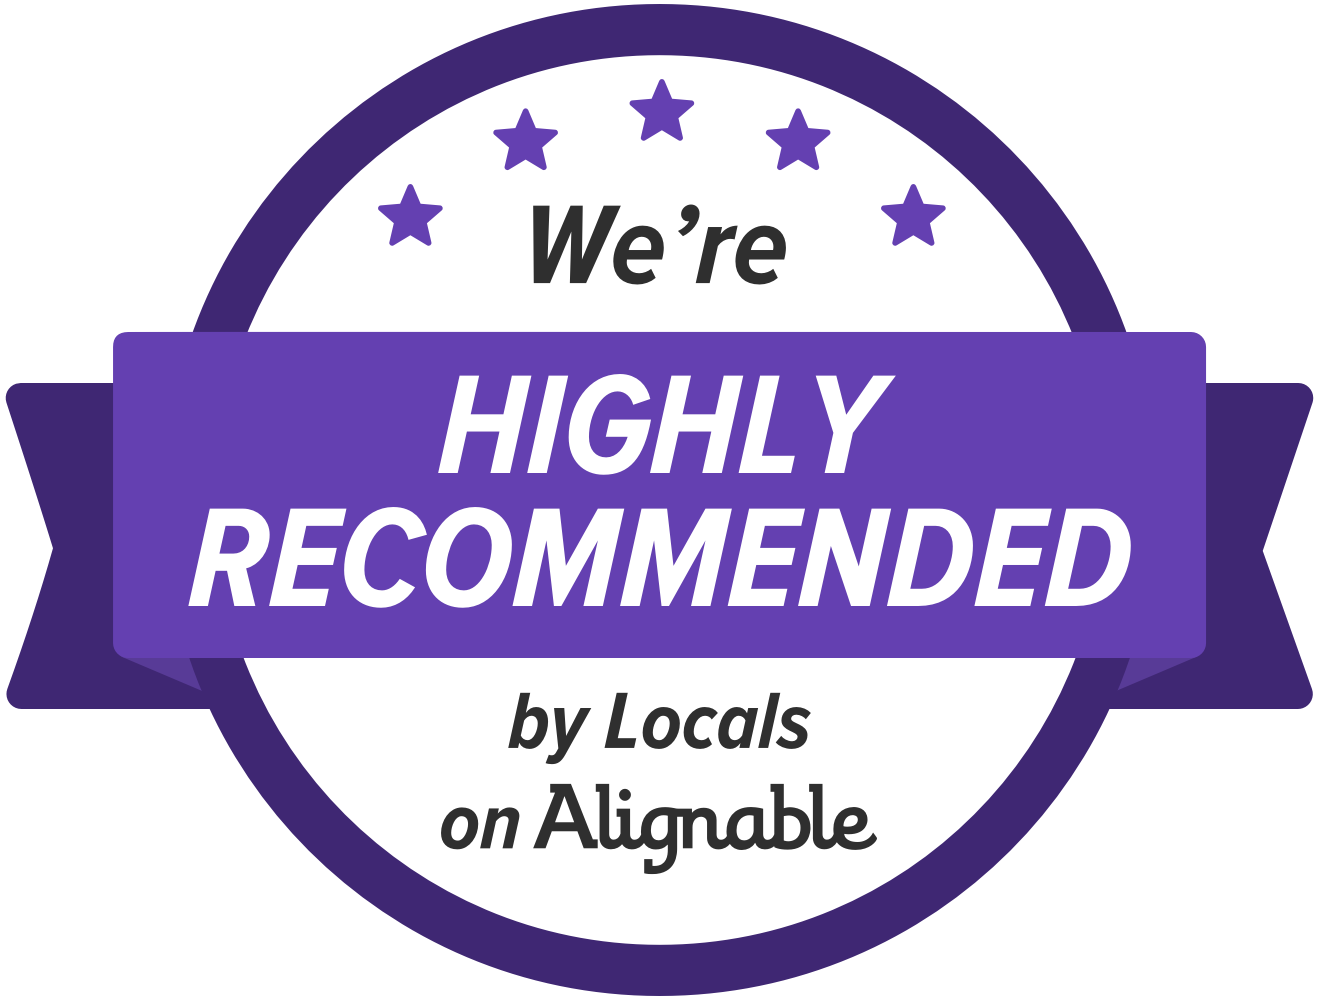 We are Highly Recommended by Locals on Alignable